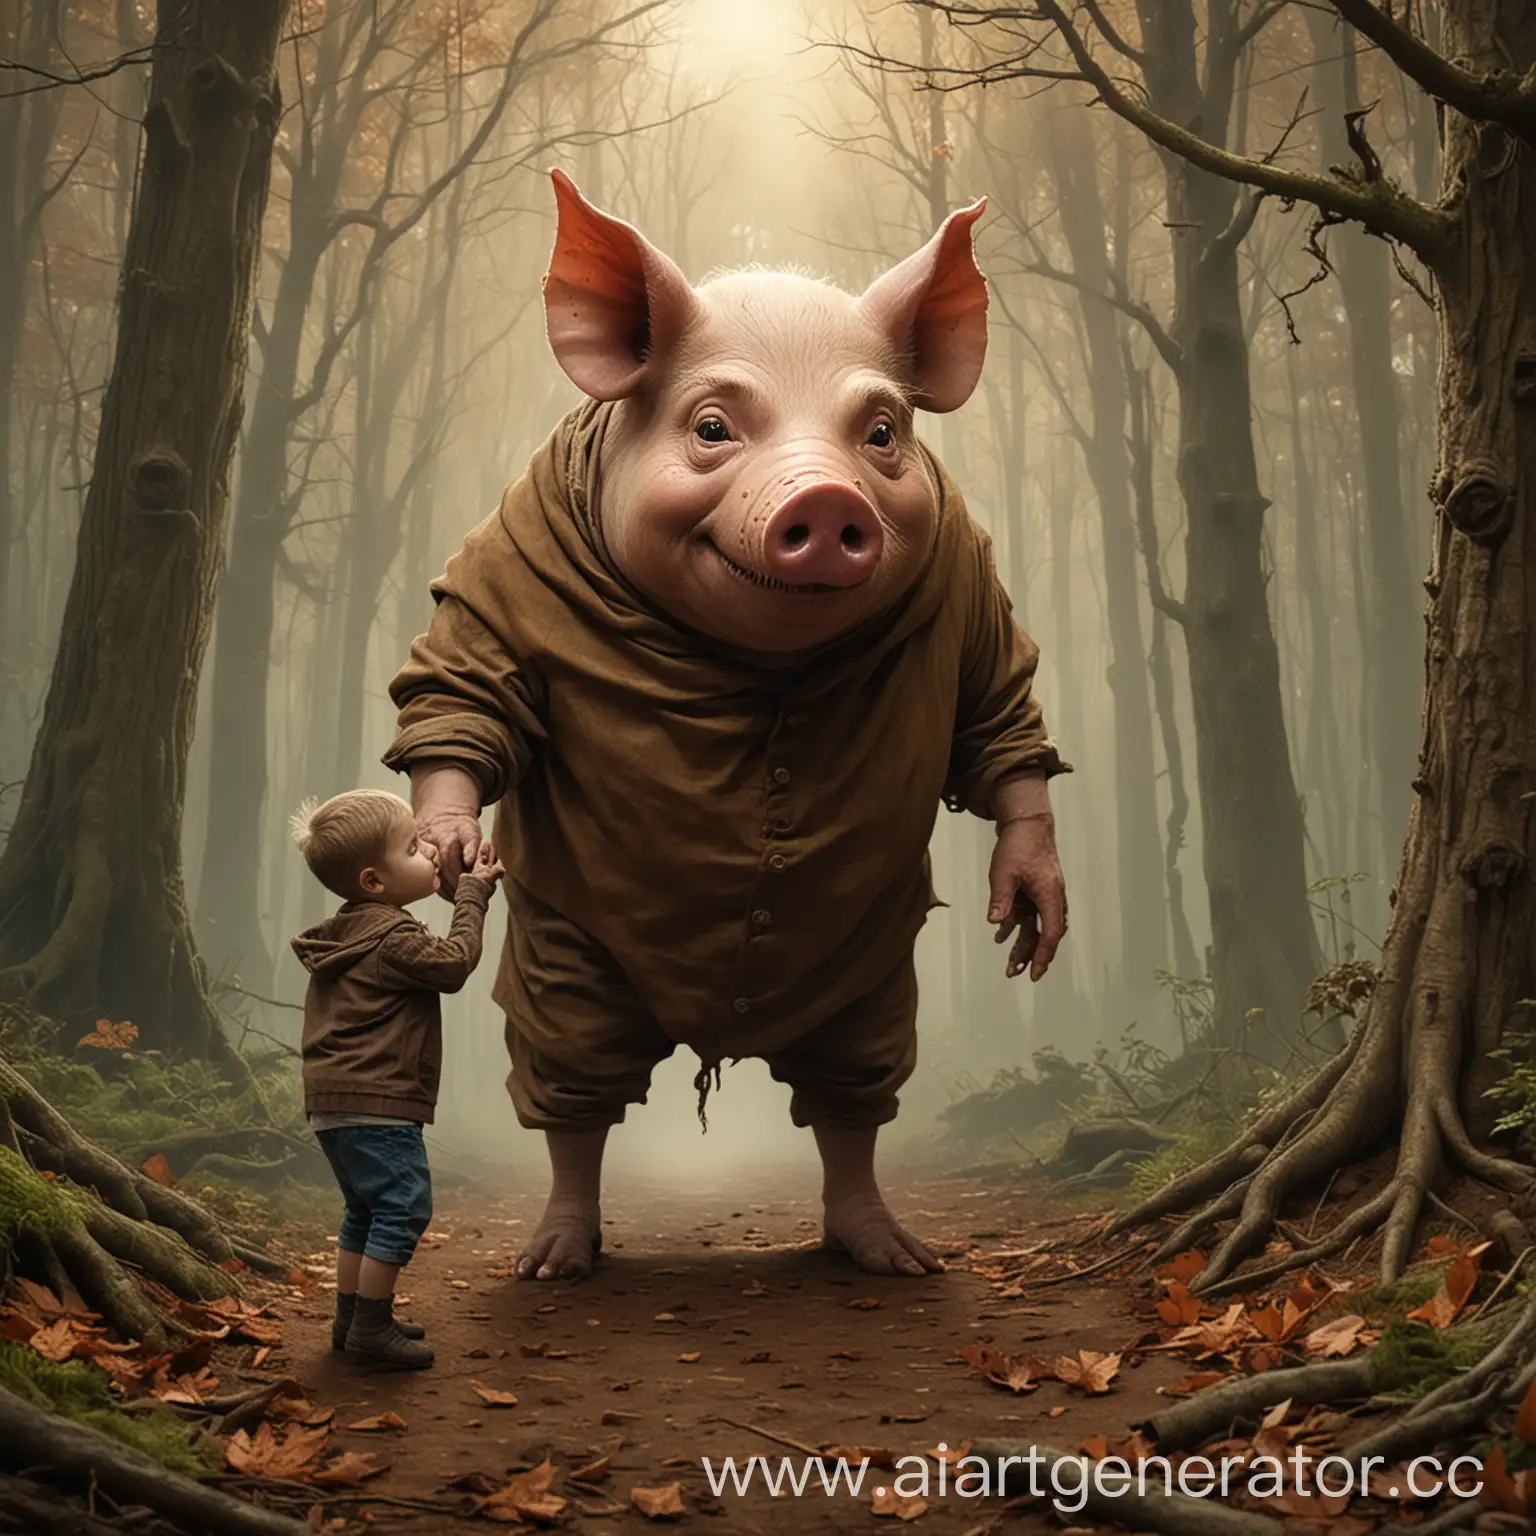 Sinister-PigMan-in-Brown-Mantle-Tempts-Child-into-Forest